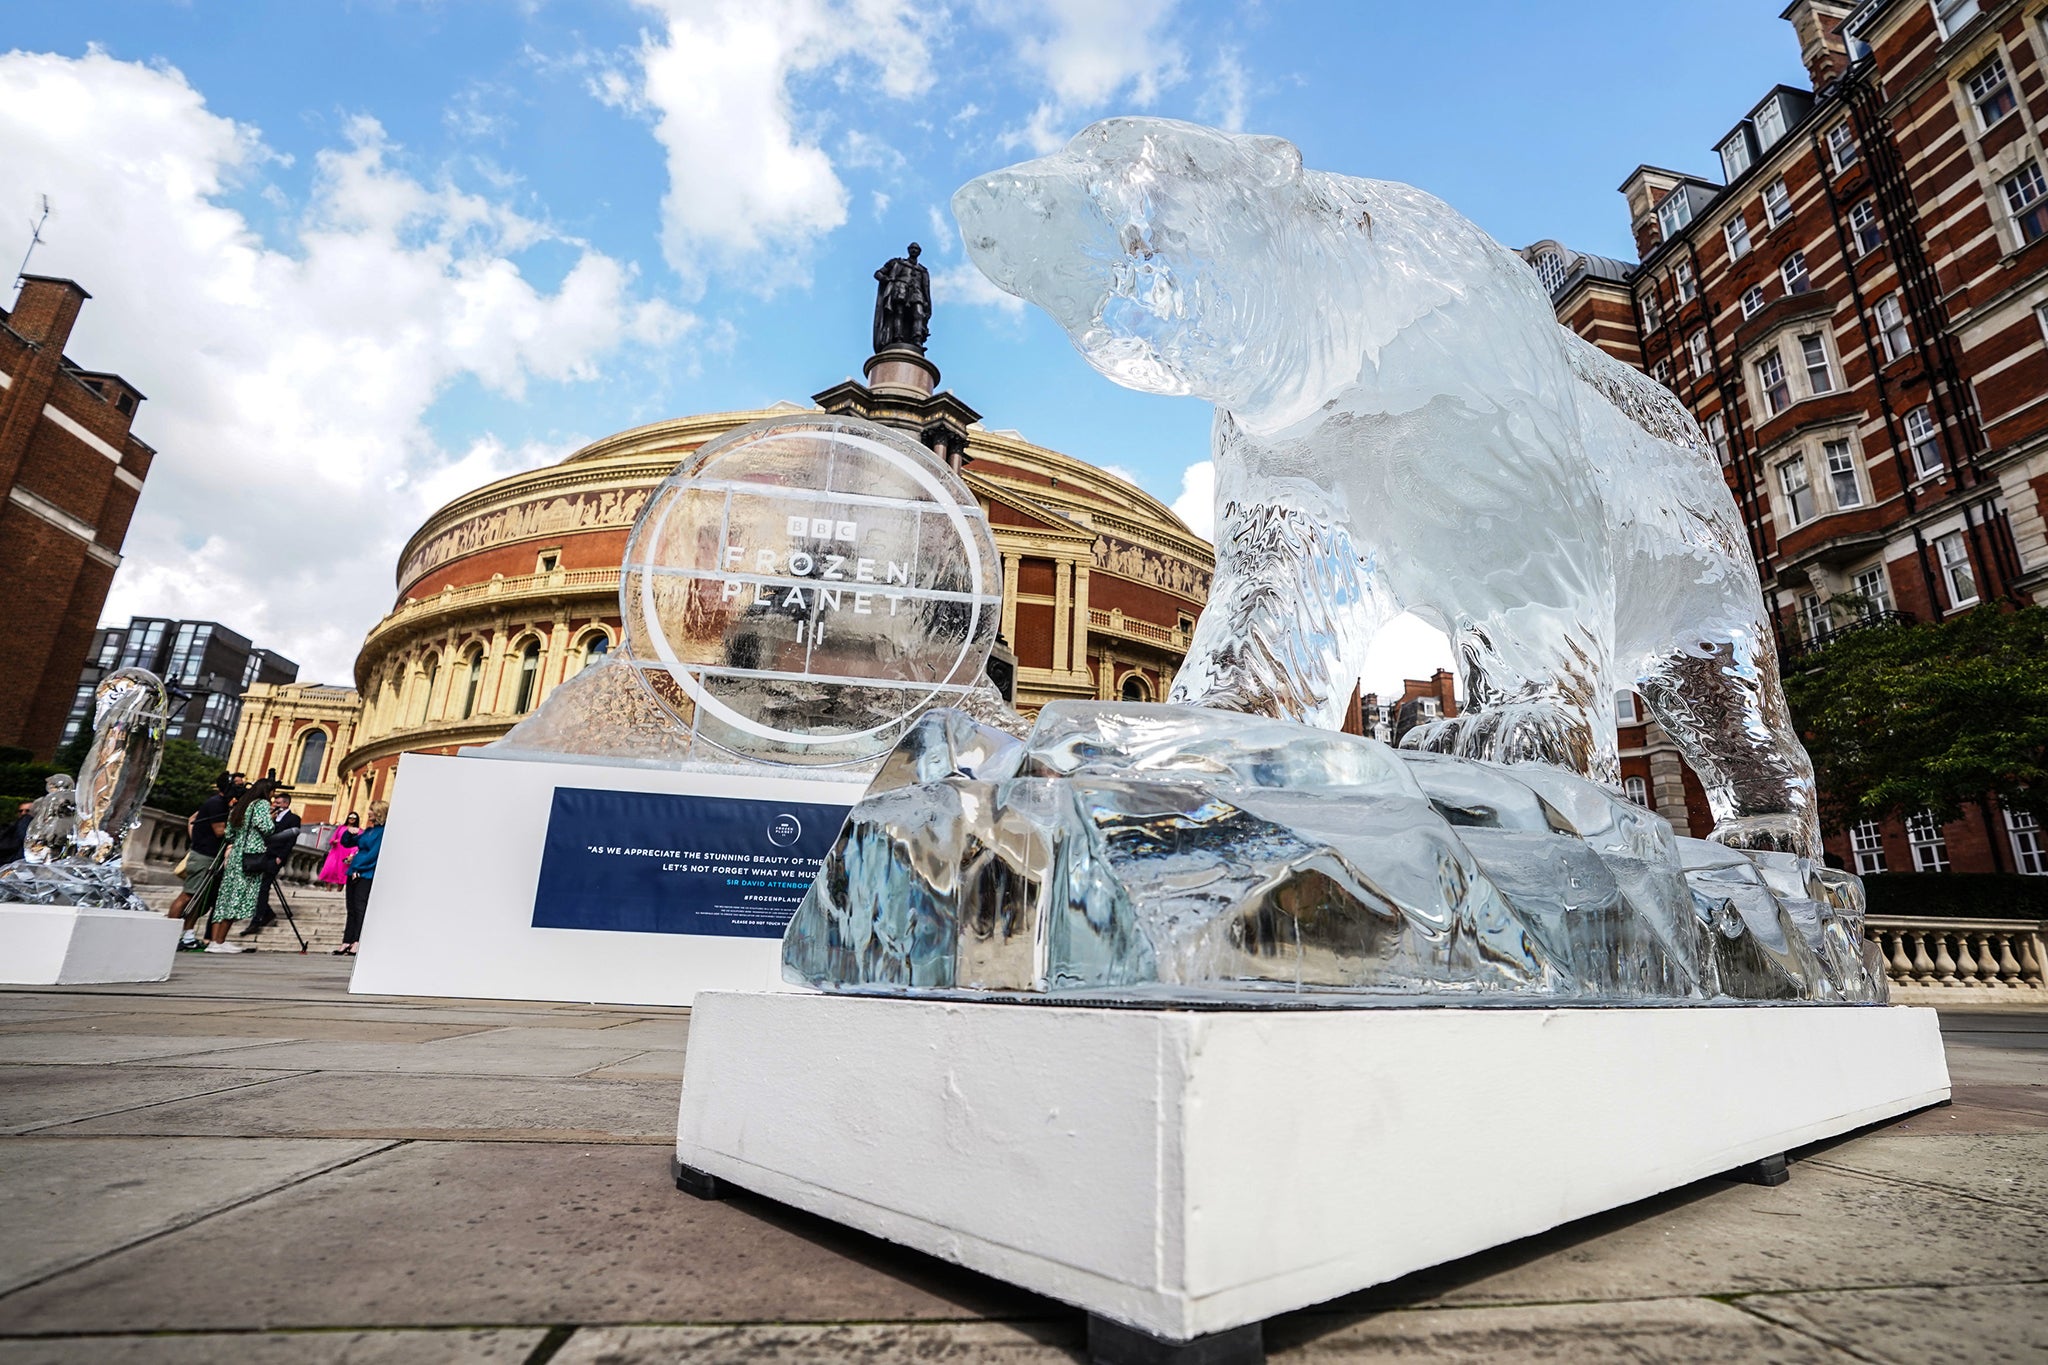 Ice sculptures of penguins and polar bears decorate the steps of the Royal Albert Hall as part of the launch of ‘Frozen Planet II’